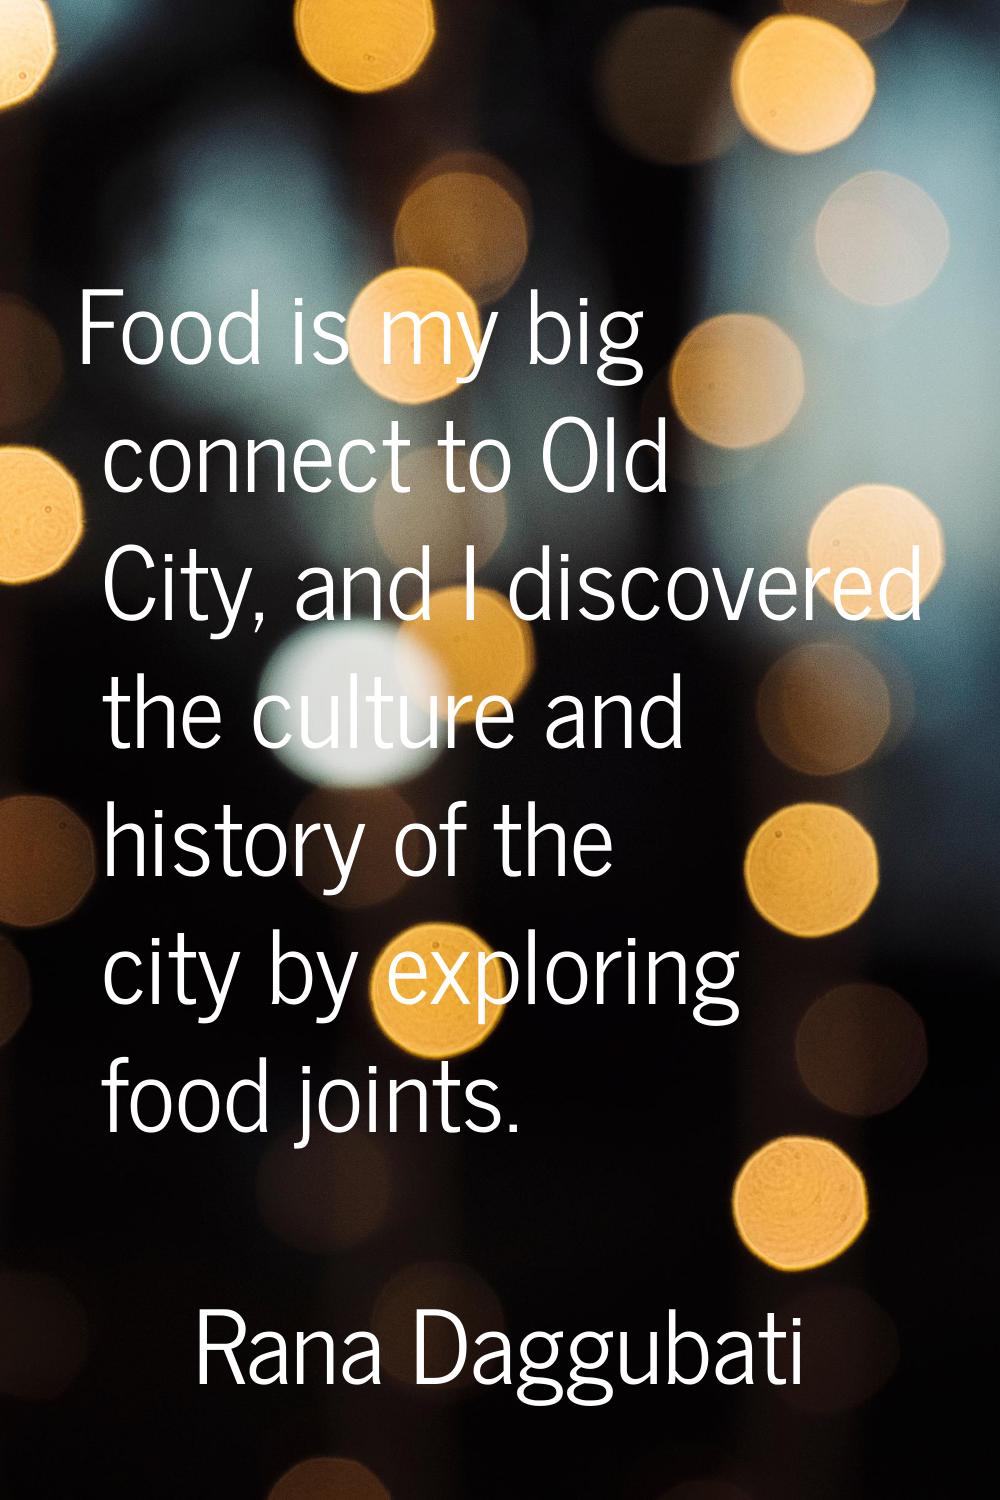 Food is my big connect to Old City, and I discovered the culture and history of the city by explori